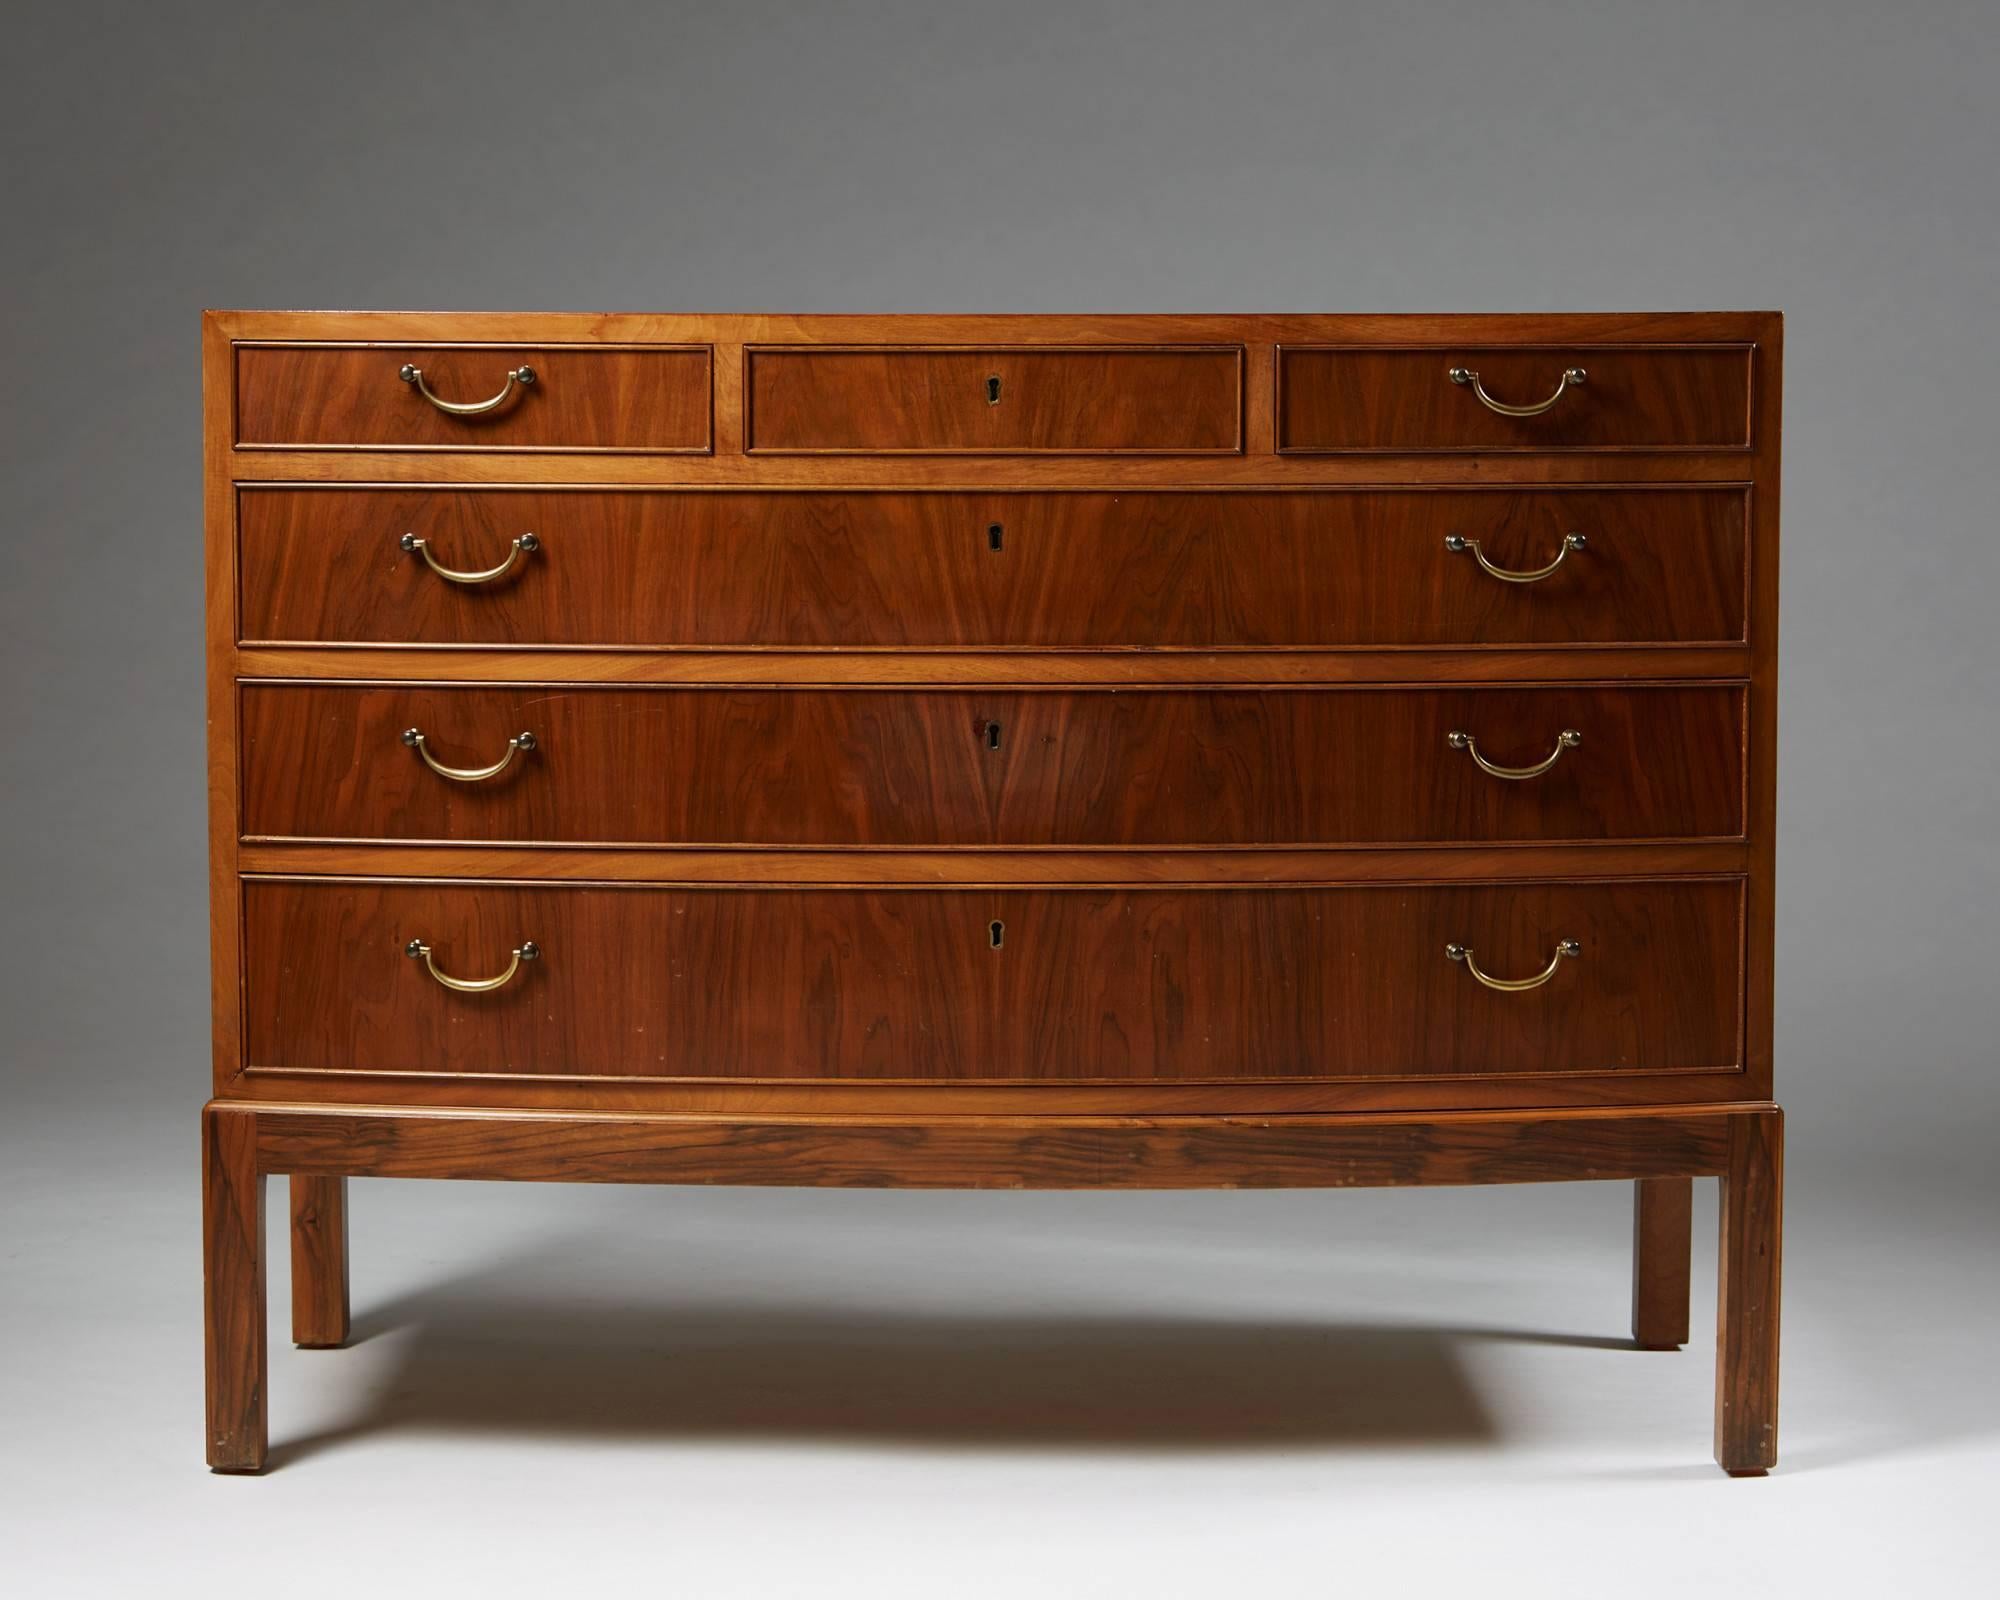 Chest of drawers designed by Ole Wanscher for Illums Bolighus, Denmark, 1940s.
Walnut and brass.

H 78 cm/ 30 3/4".
L 106 cm/ 3' 5 1/2".
D 49 cm/ 19 1/4".